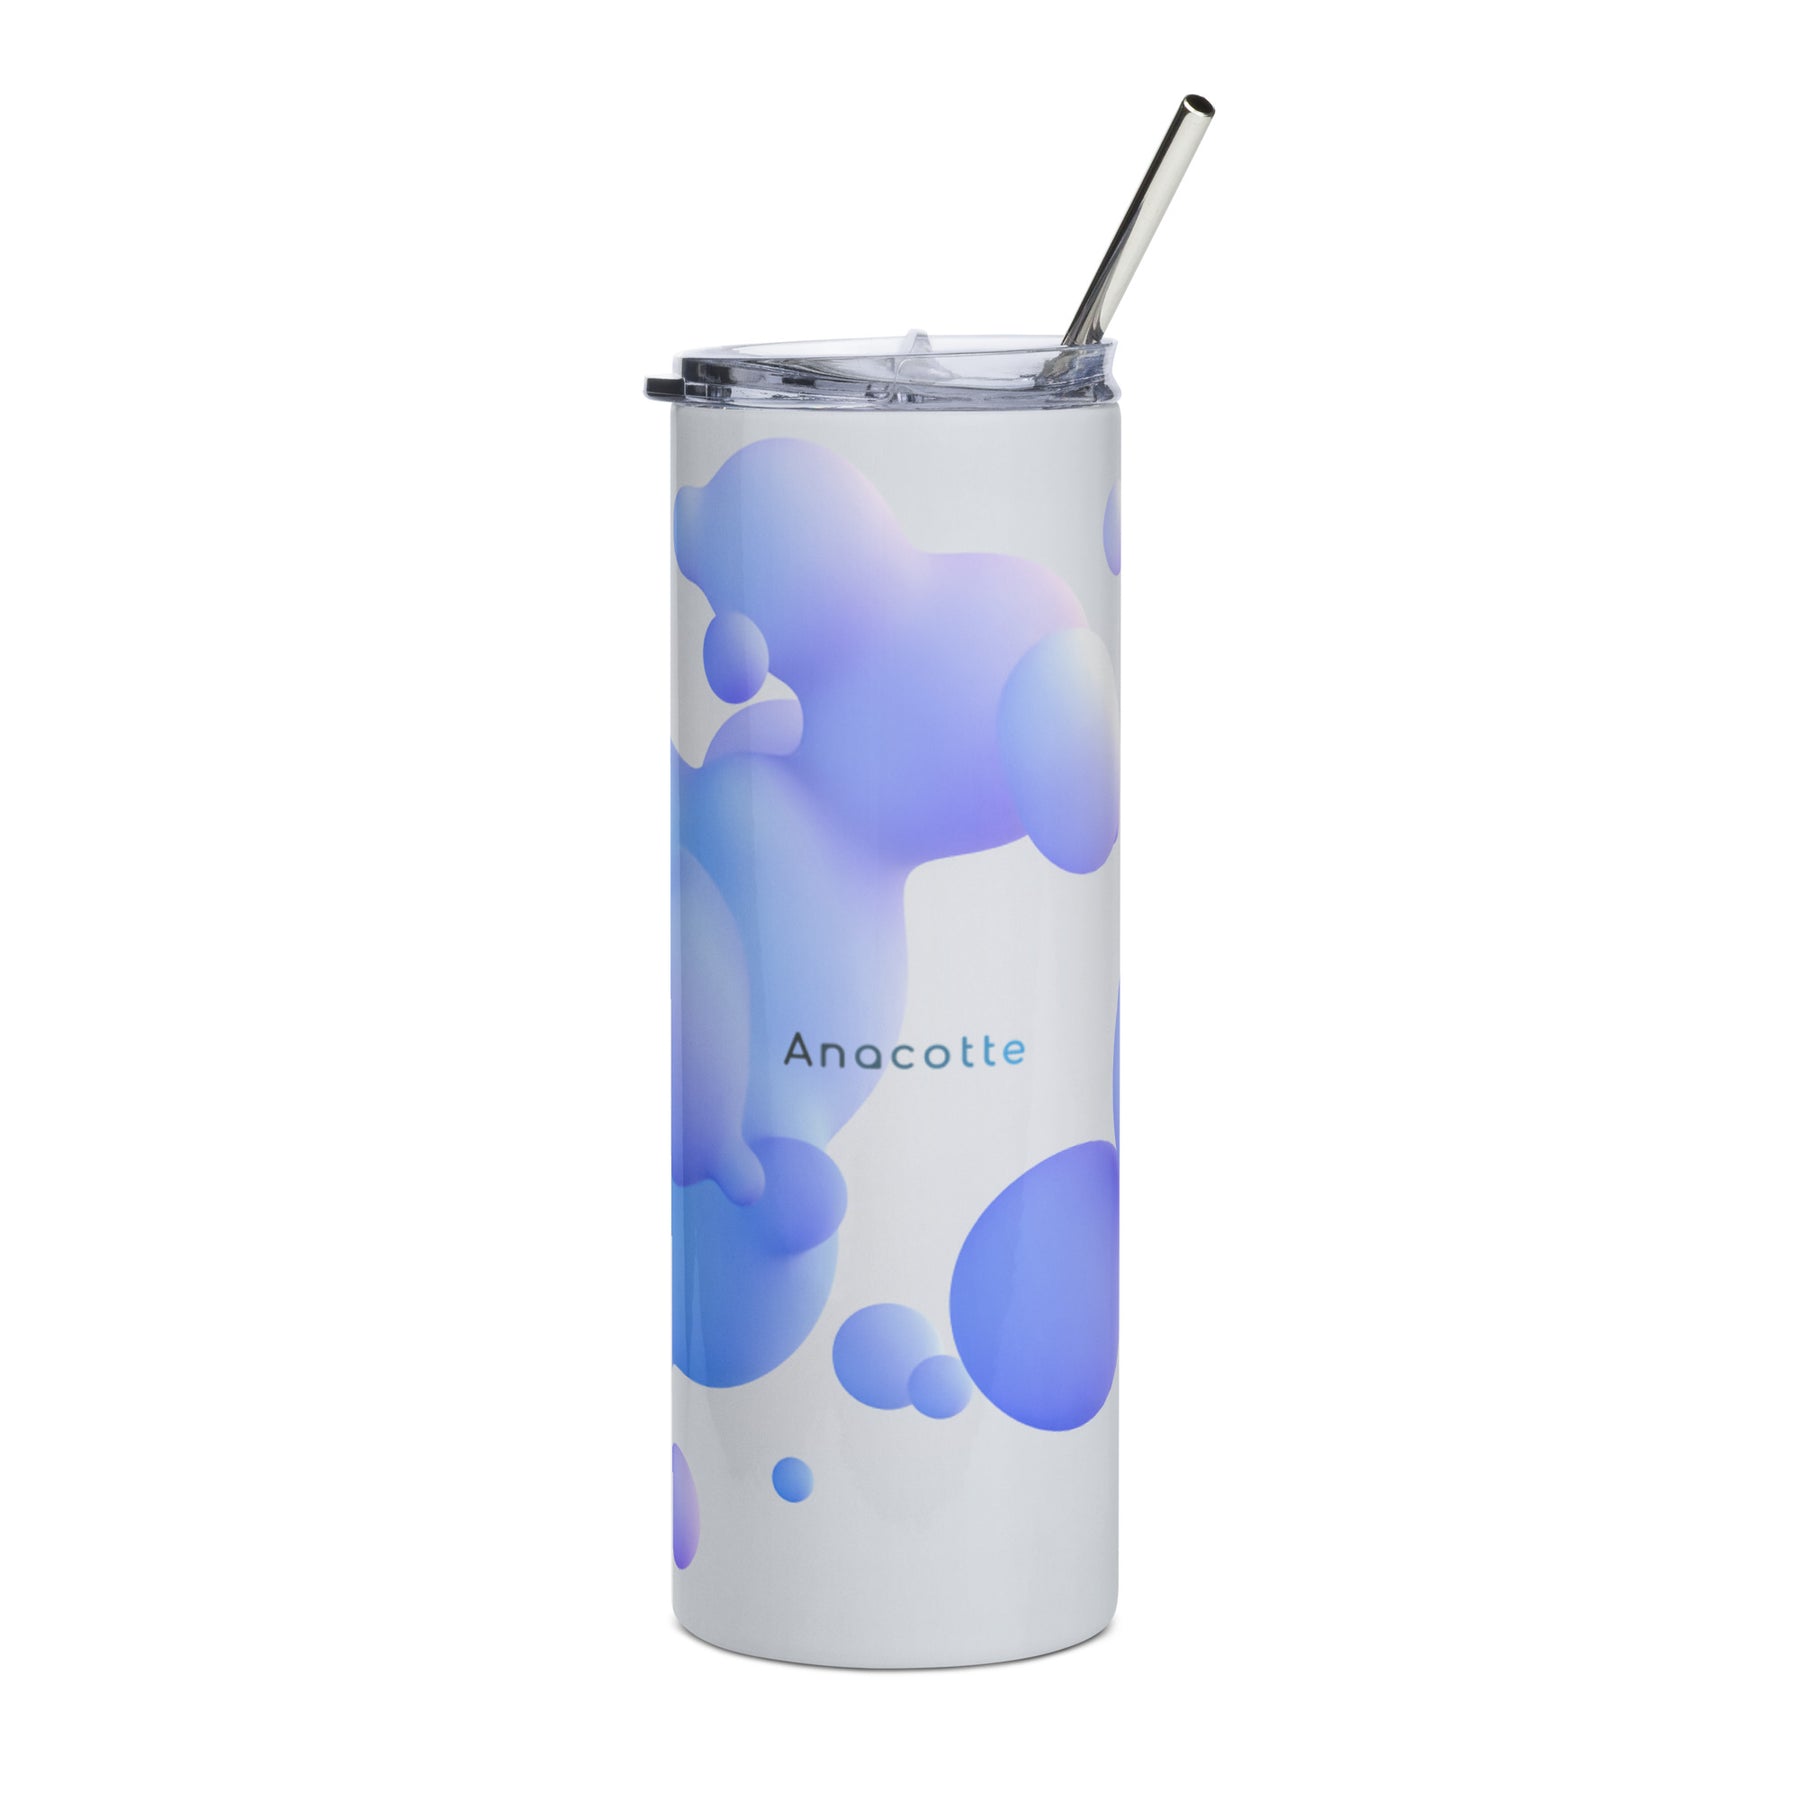 Anacotte Tumbler,Insulated Waterbottle,and Drinkware